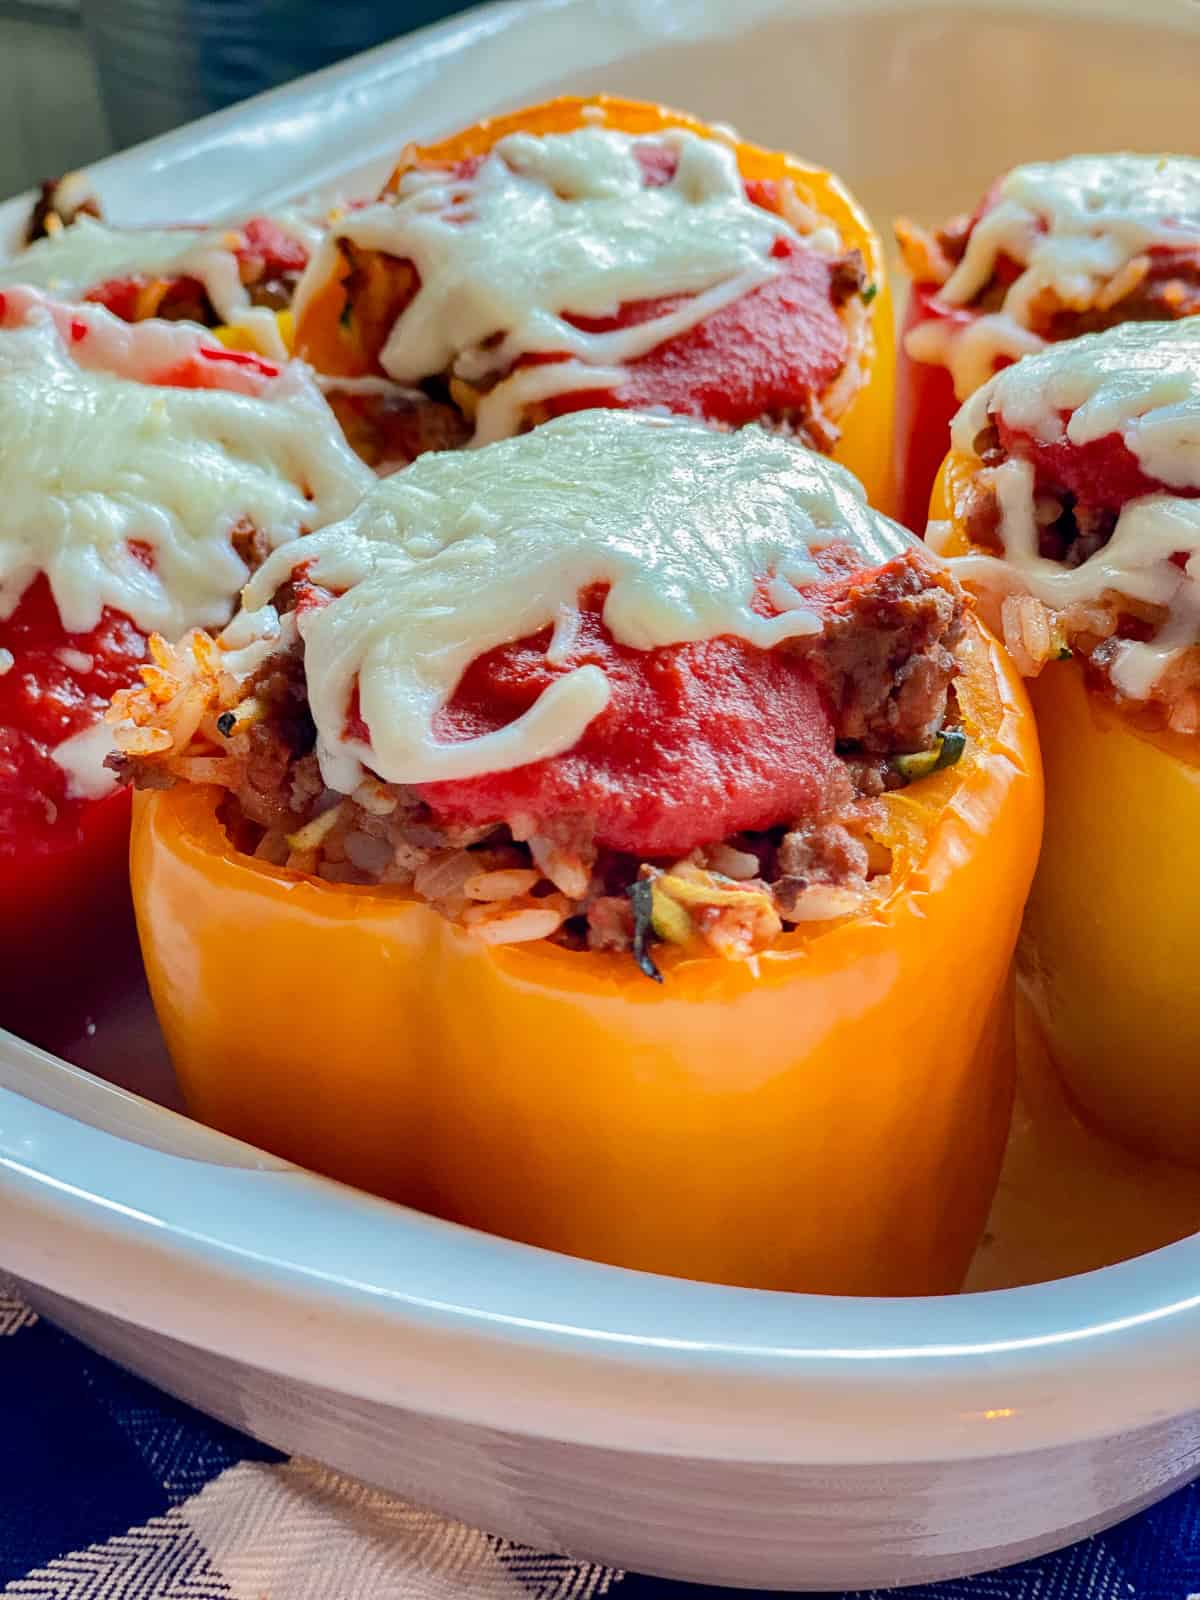 close up of orange stuffed peppers with red sauce and white cheese.